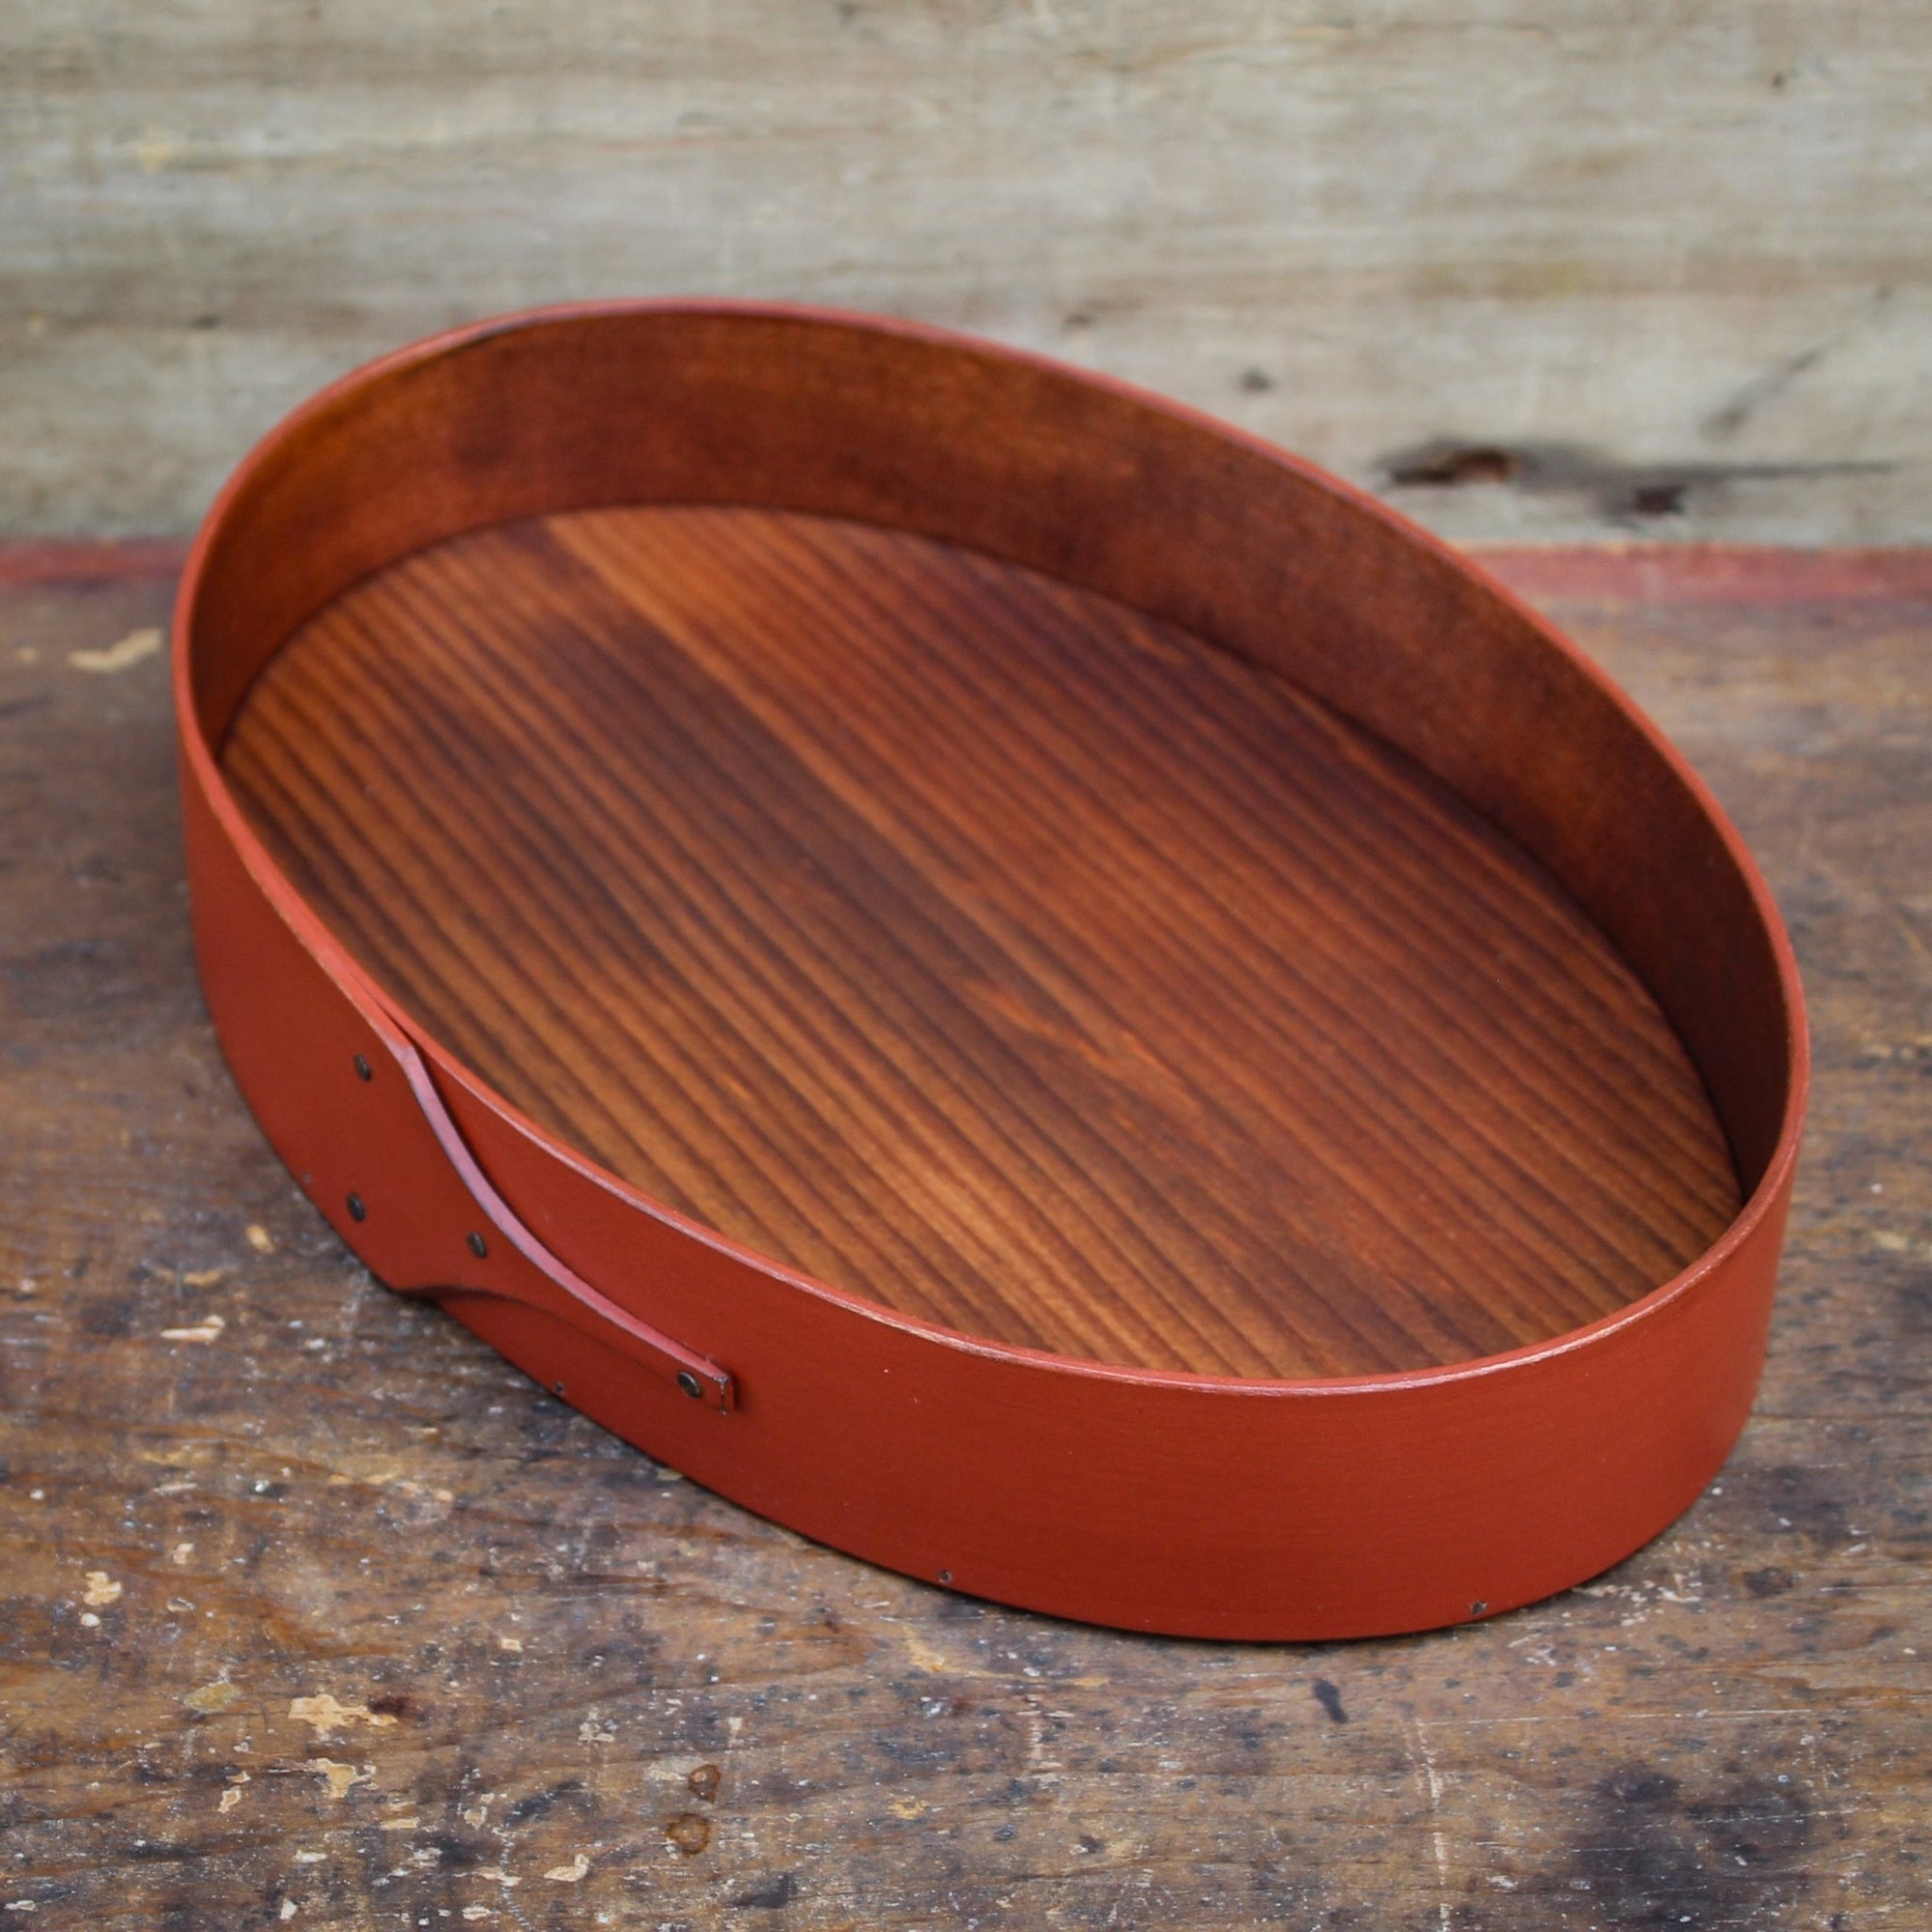 Shaker Style Oval Stitchers Tray, LeHays Shaker Boxes, Handcrafted in Maine, Red Milk Paint Finish, Side View